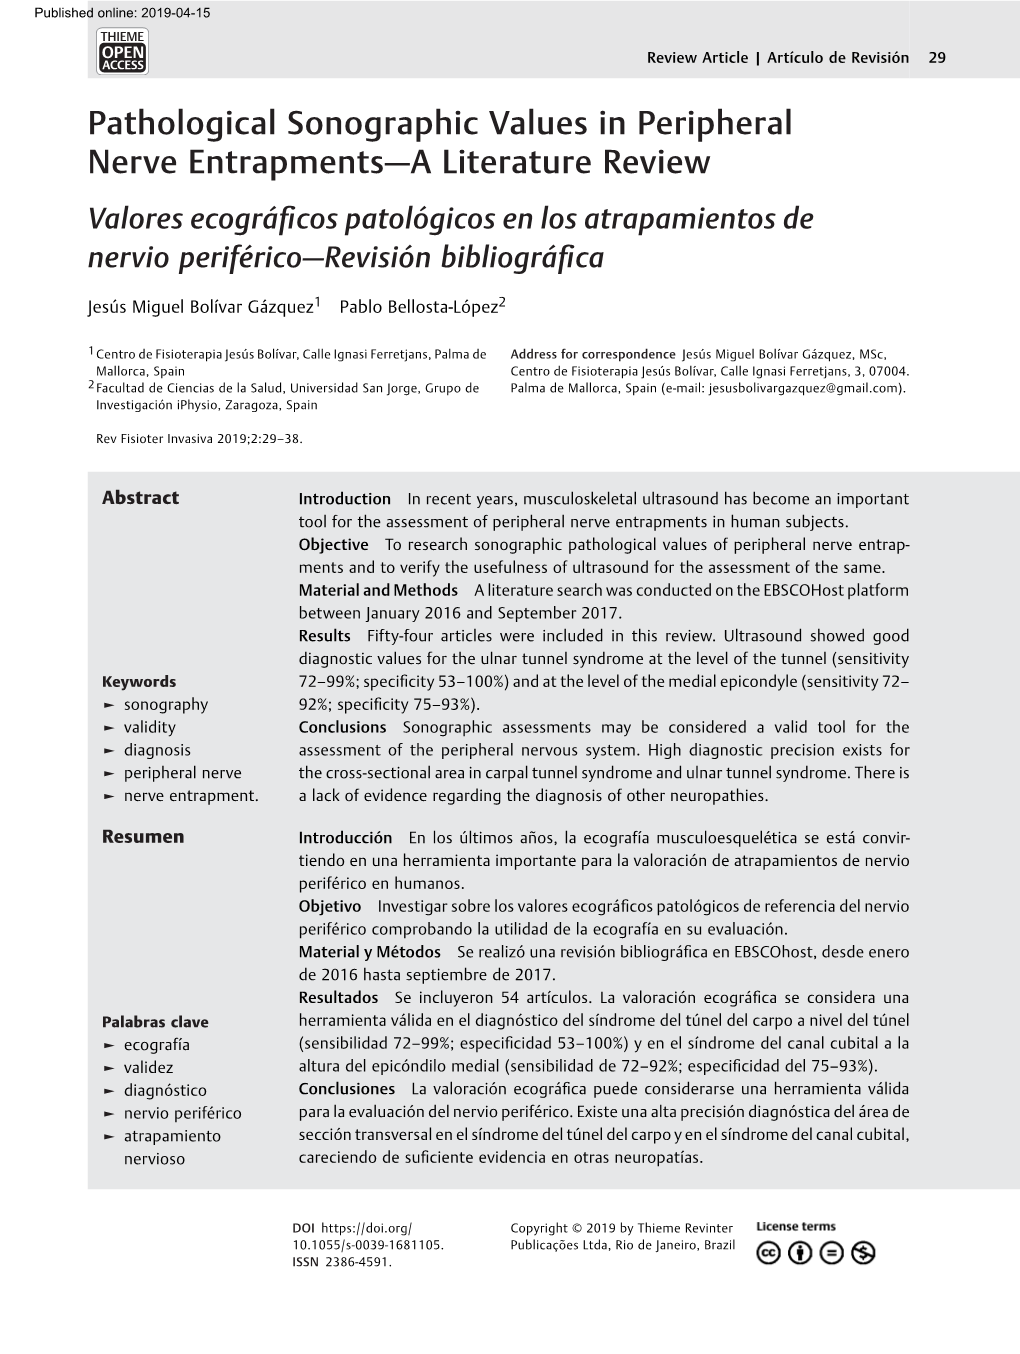 Pathological Sonographic Values in Peripheral Nerve Entrapments—A Literature Review